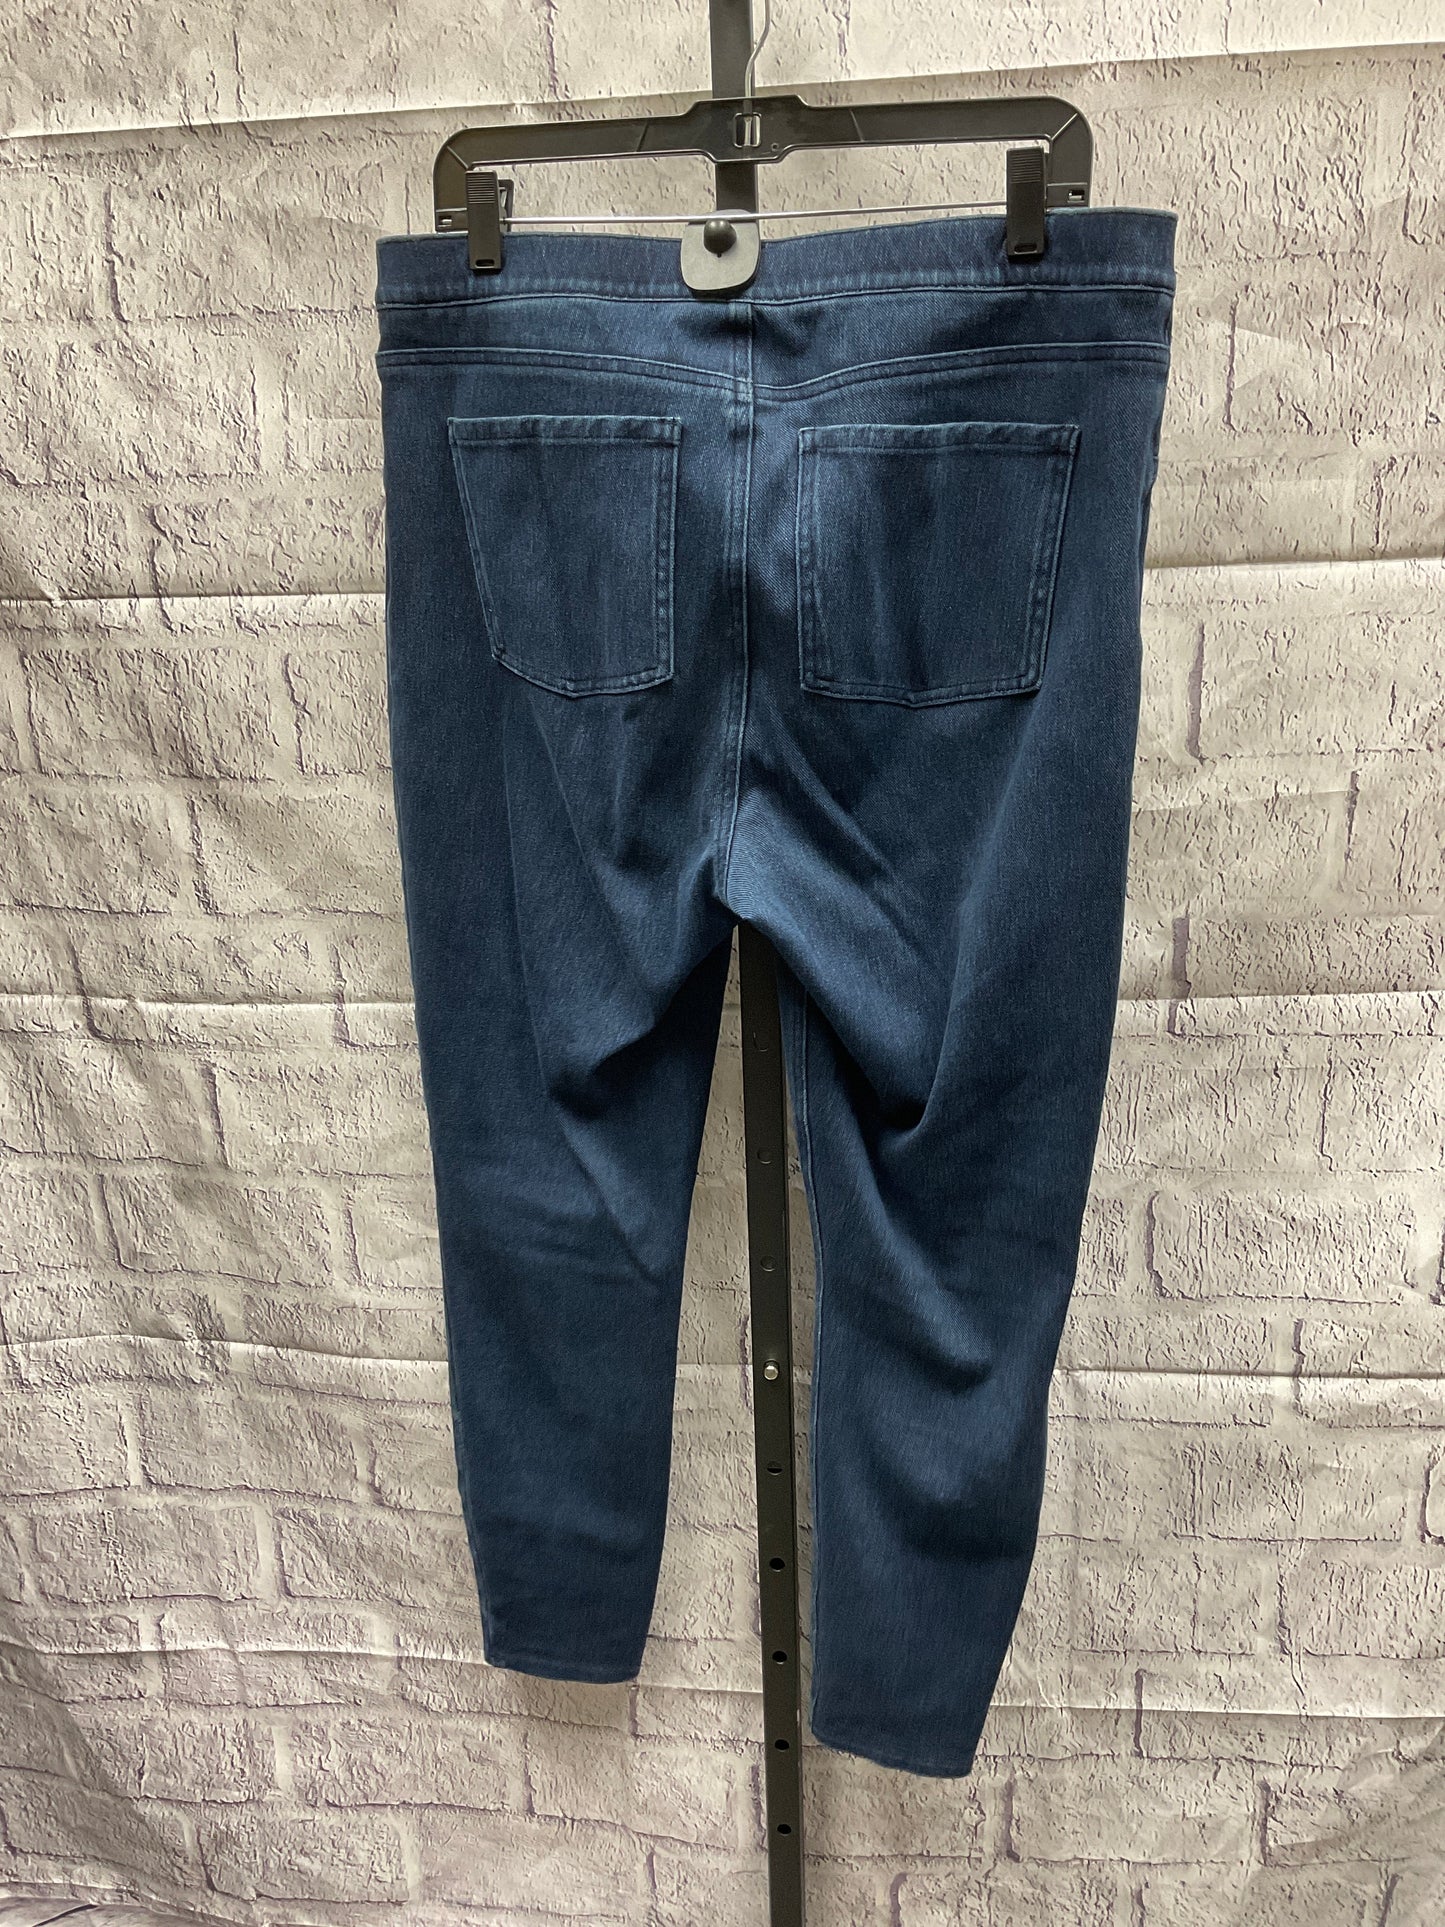 Jeans Jeggings By Spanx  Size: 1x